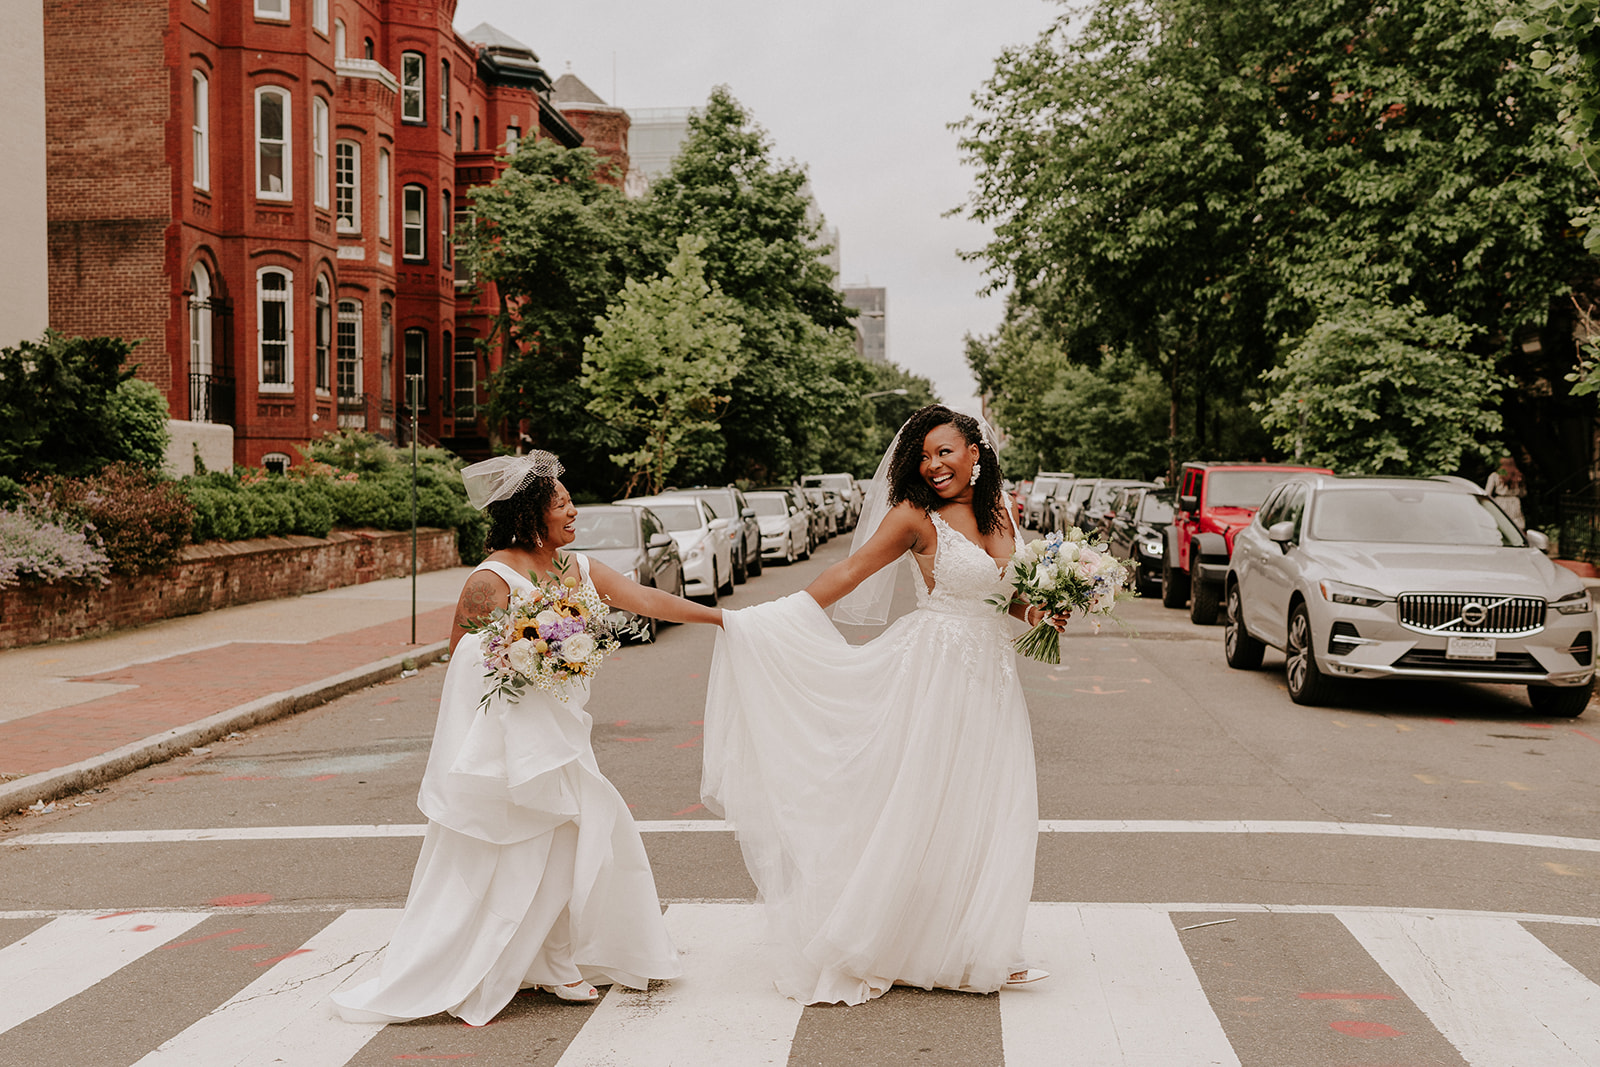 A same-sex couple brunch micro elopement wedding in DC at Iron Gate Restaurant